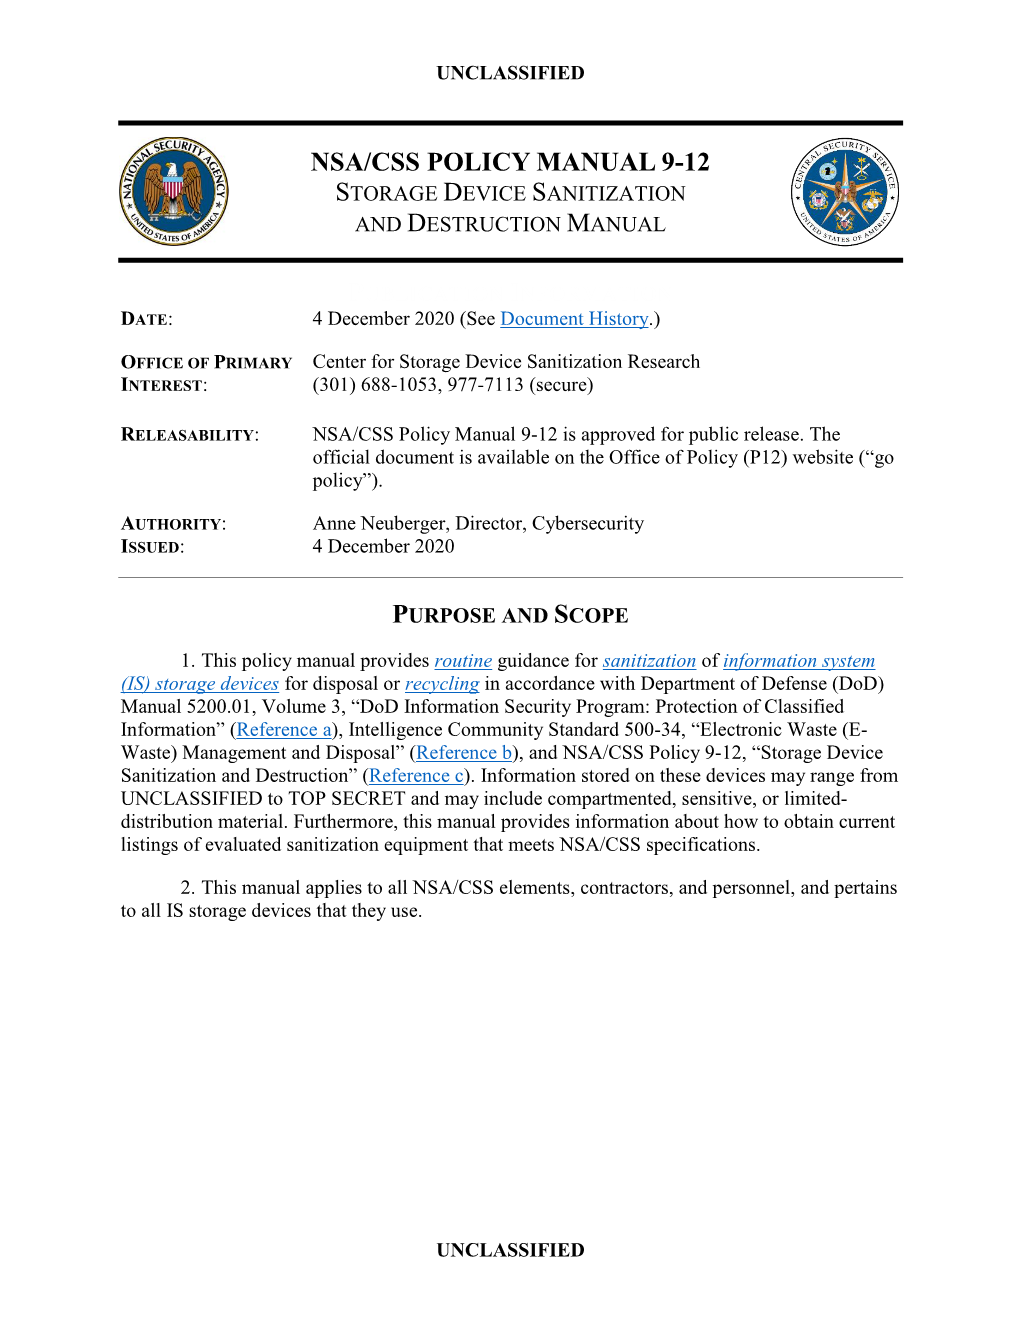 Nsa/Css Policy Manual 9-12 Storage Device Sanitization and Destruction Manual